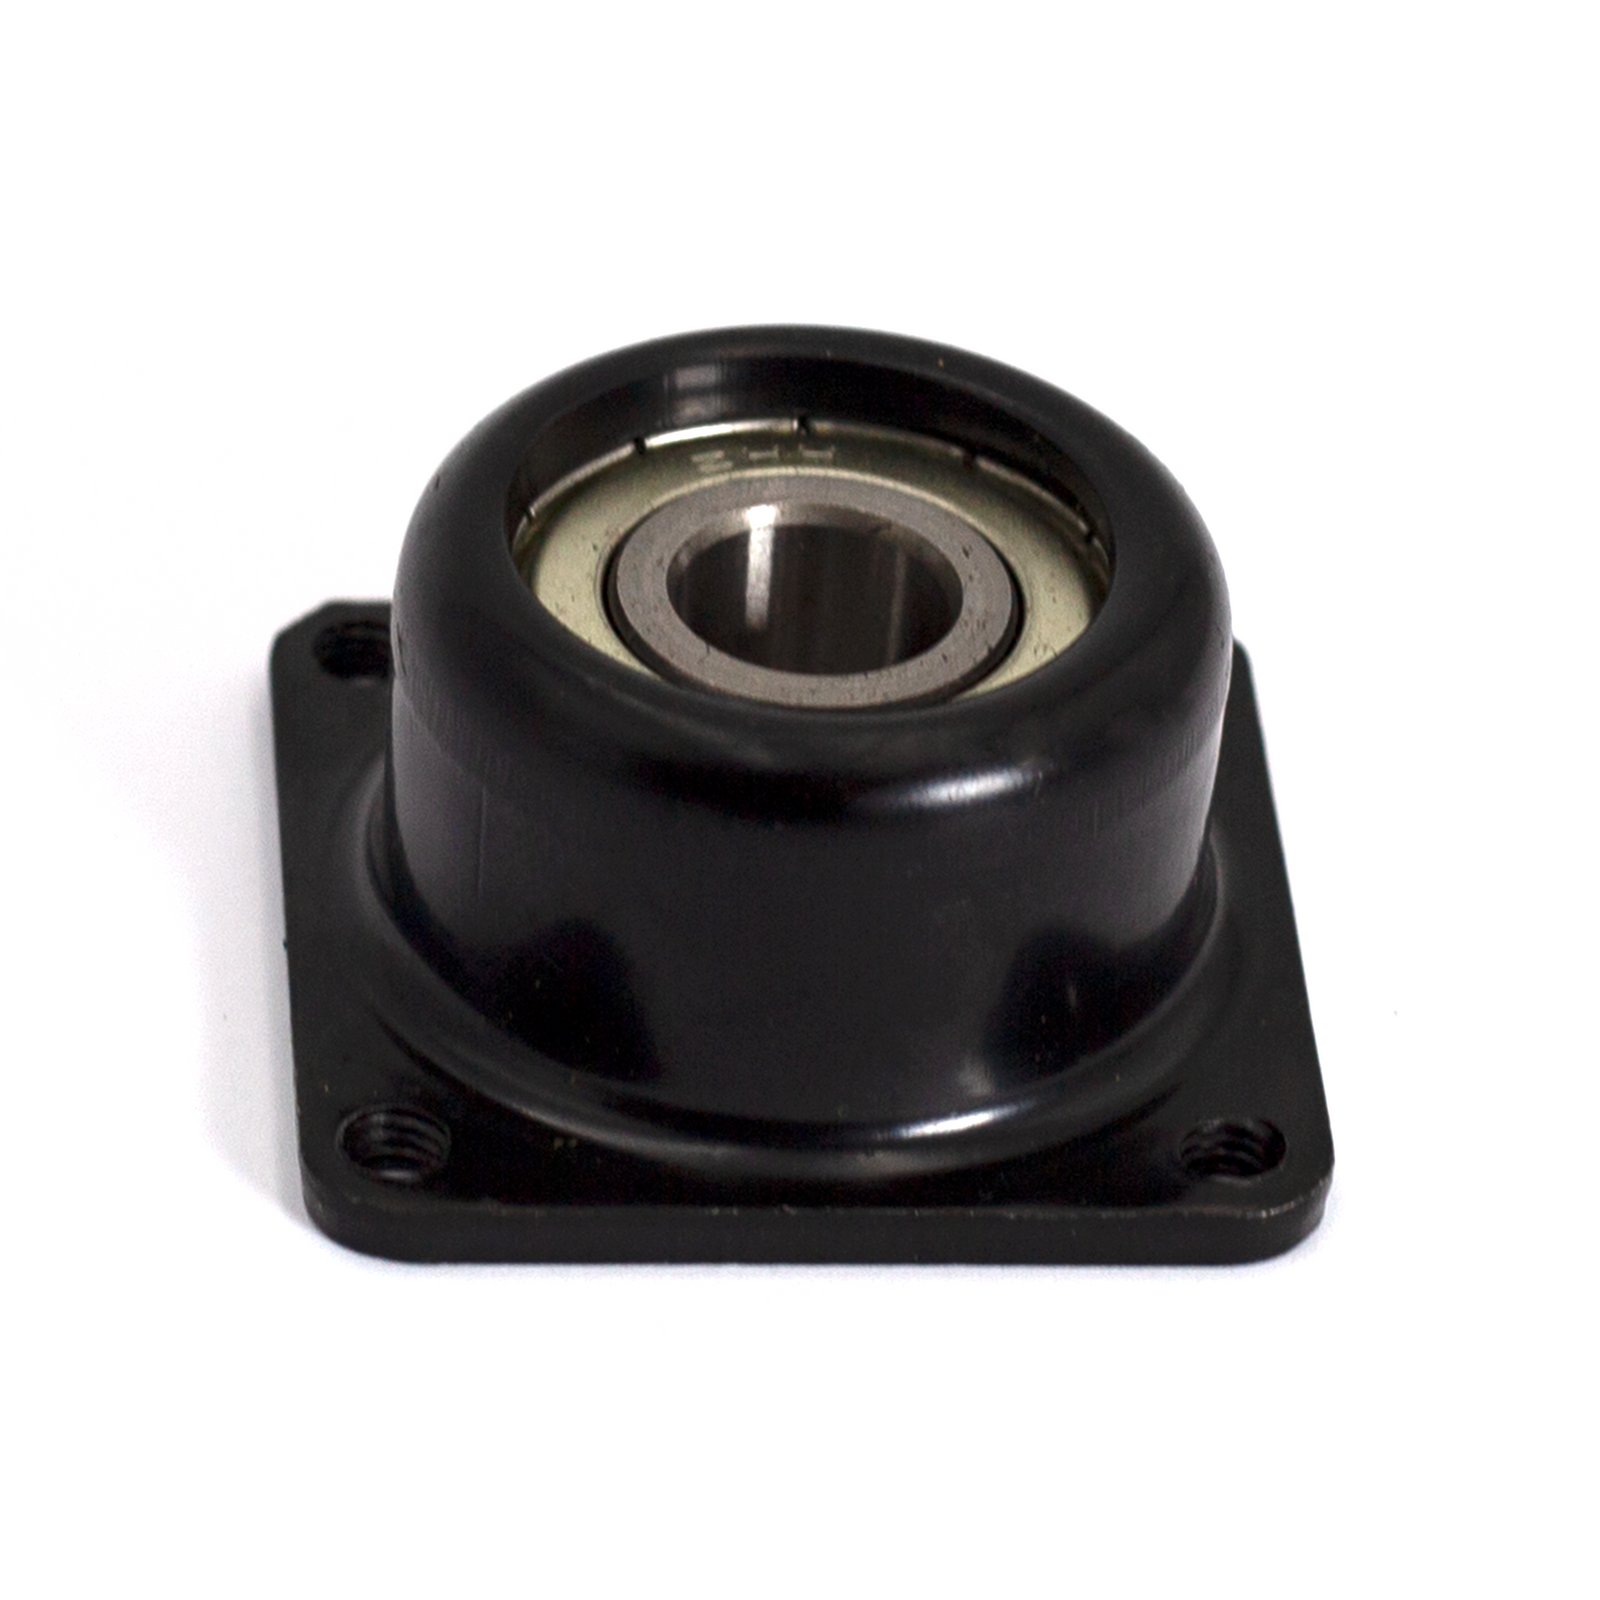 Square bearing seat assembly